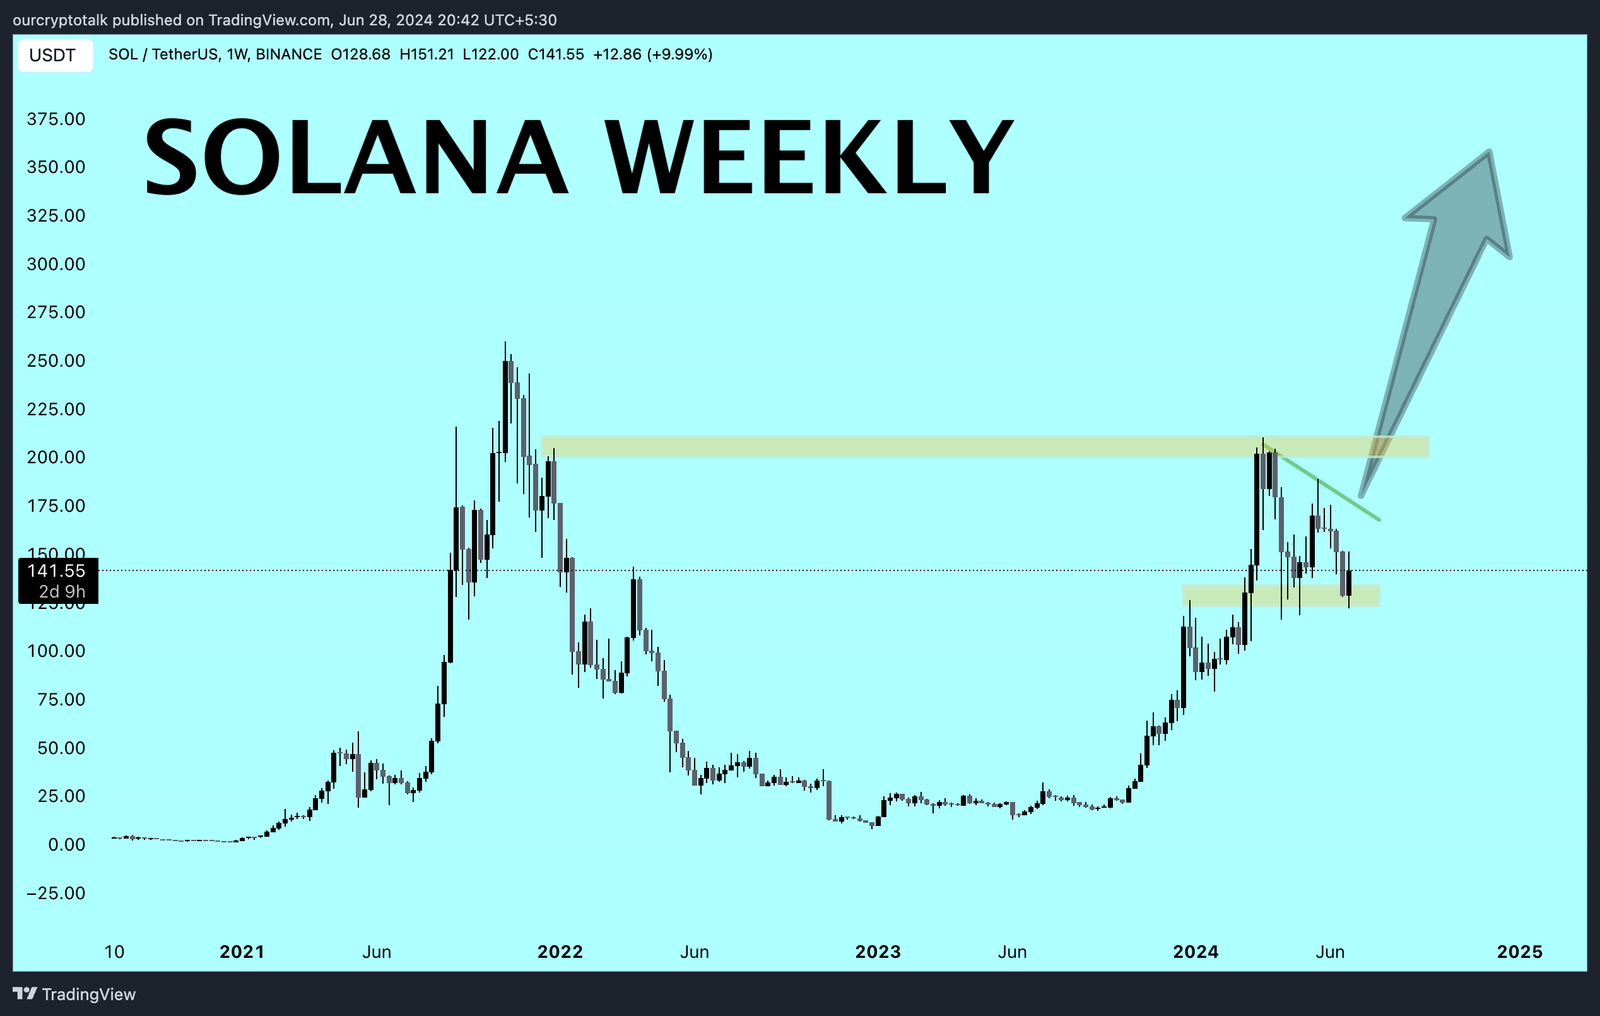 Solana Weekly Price